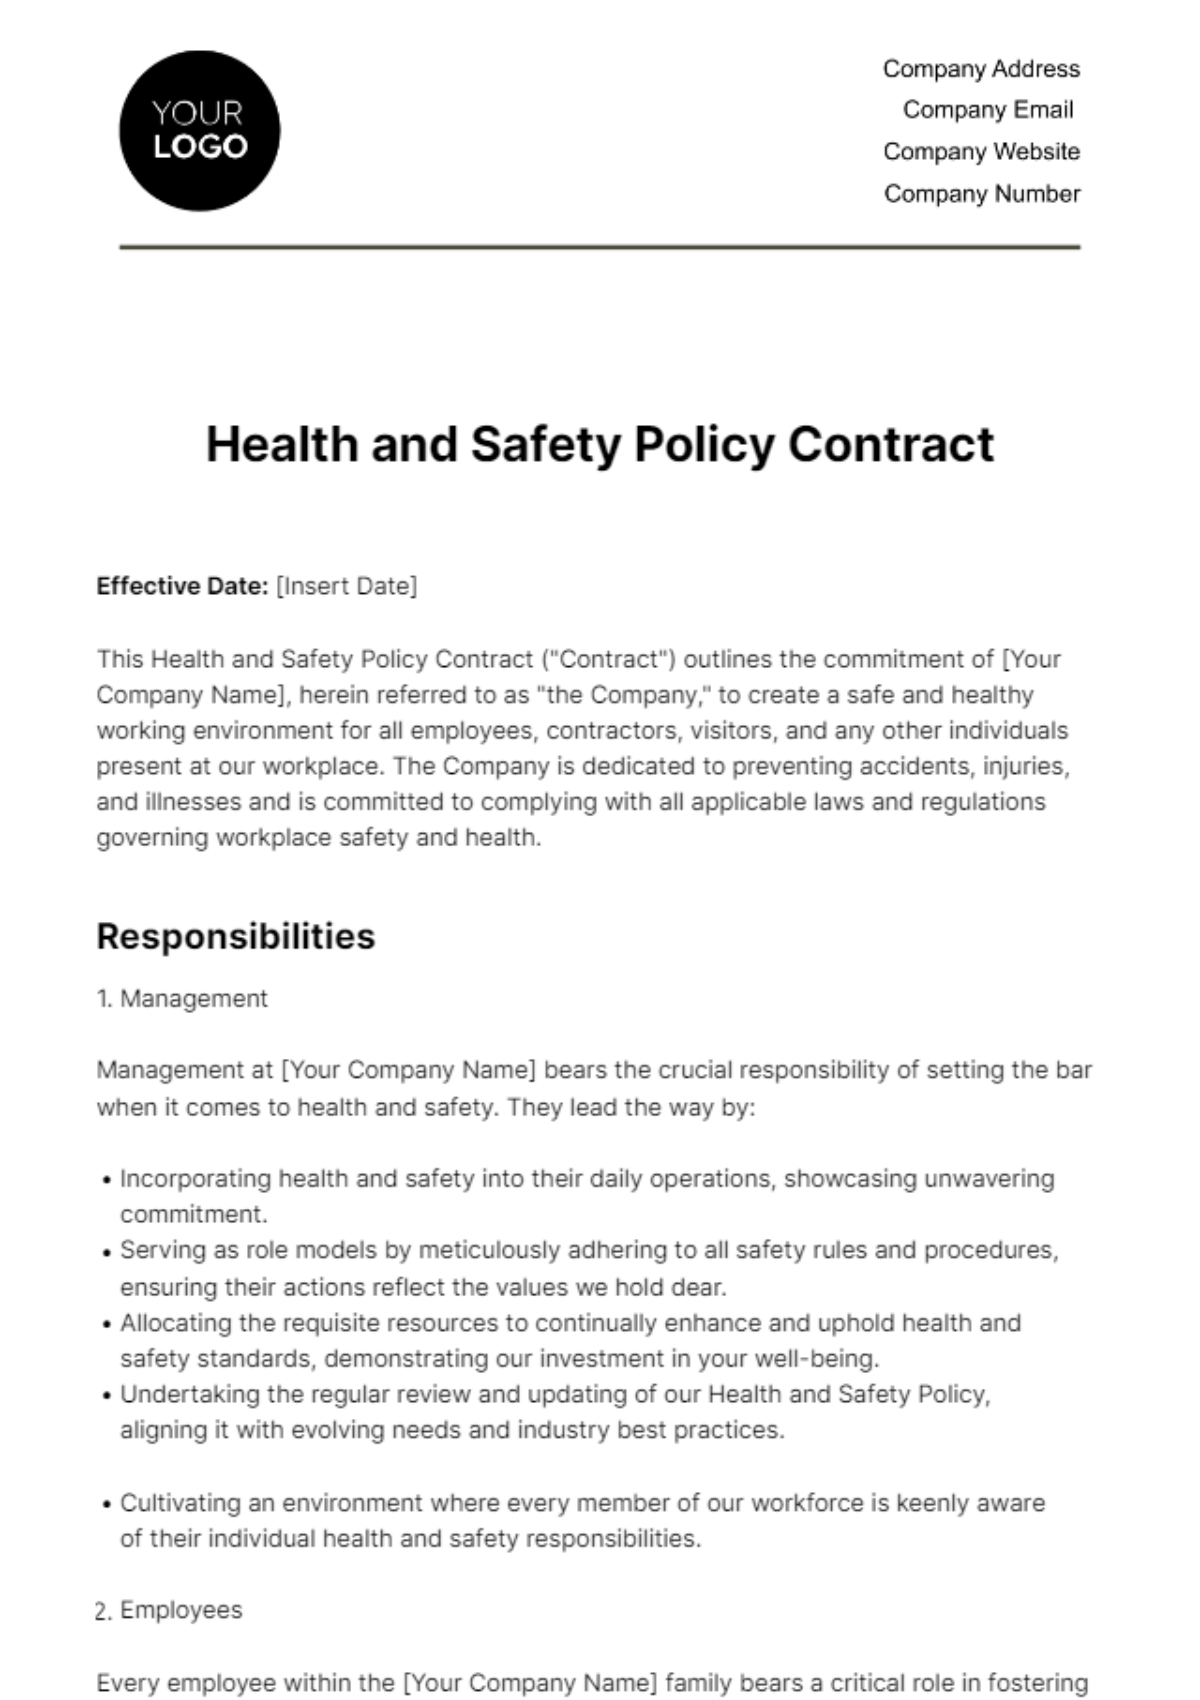 Health and Safety Policy Contract HR Template